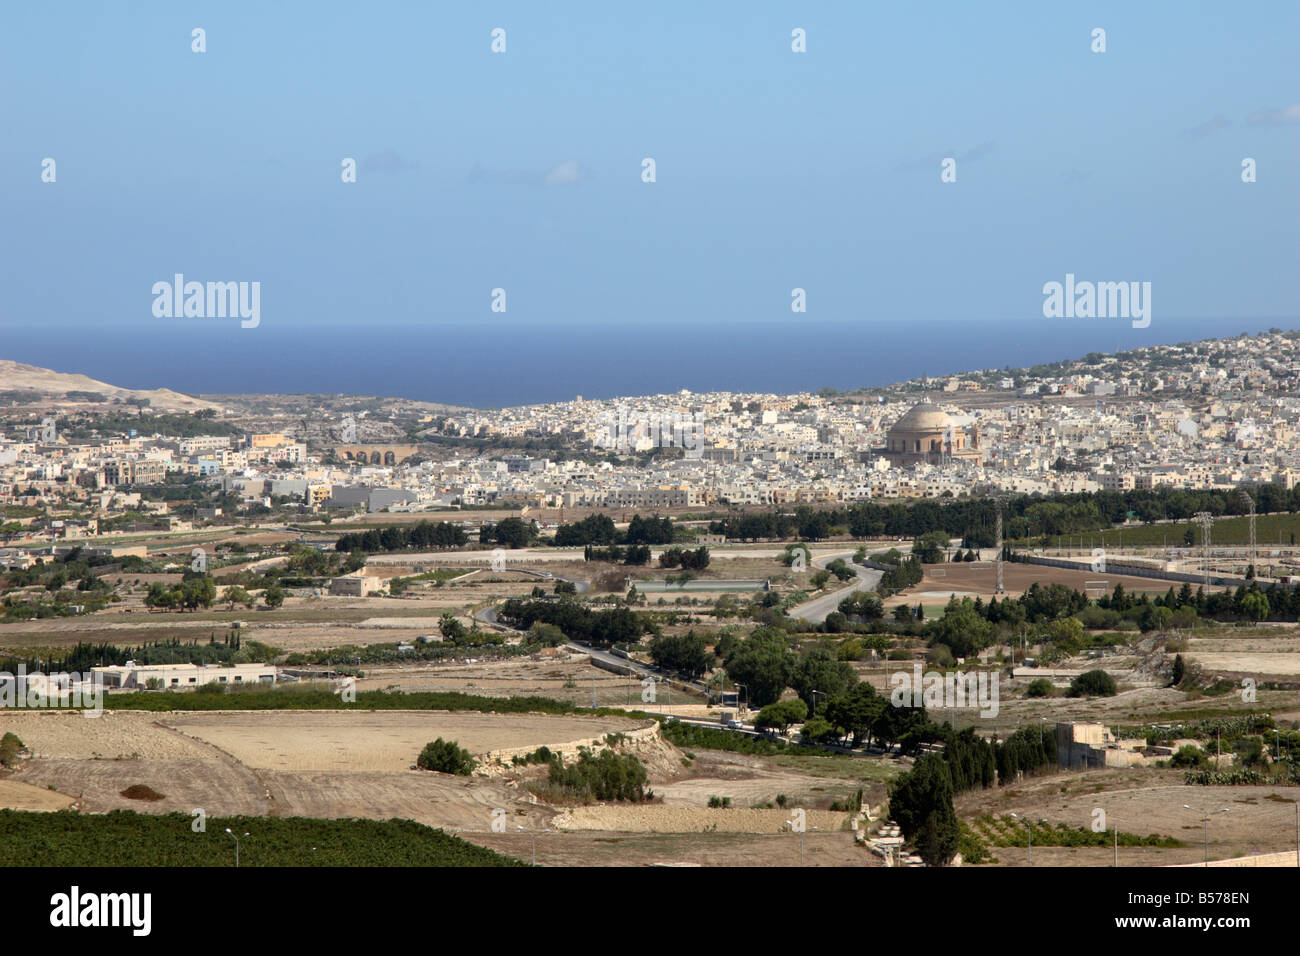 A view of Mosta from Mdina, Malta. Stock Photo